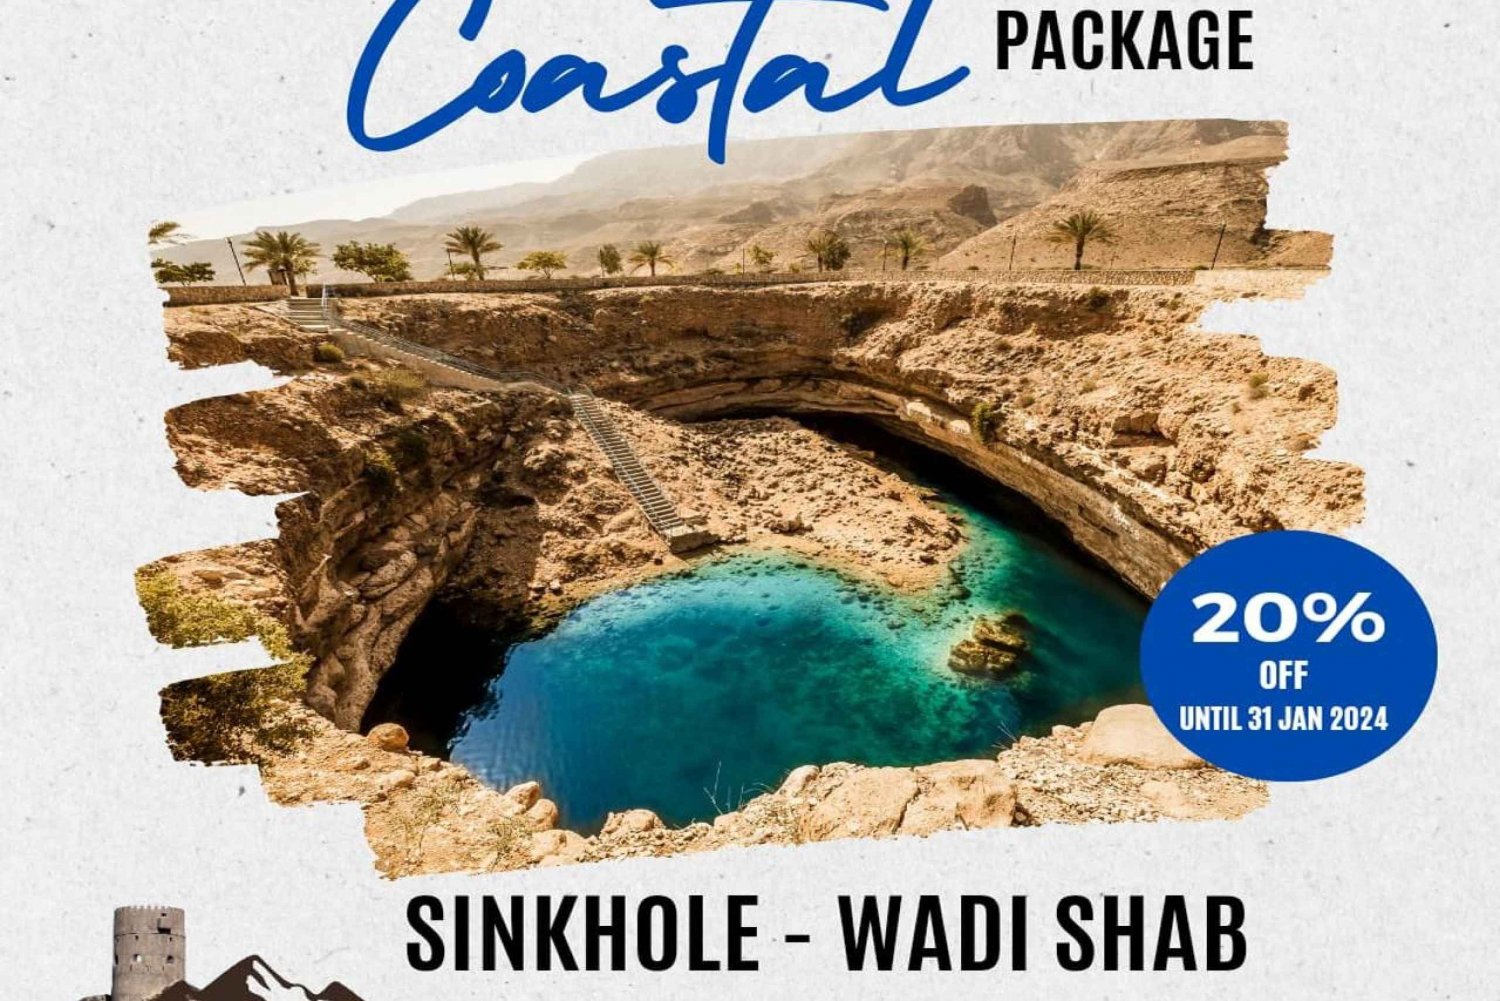 WADI SHAB - SINKHOLE: DAY TOUR WITH COASTAL BEAUTY IN MUSCAT